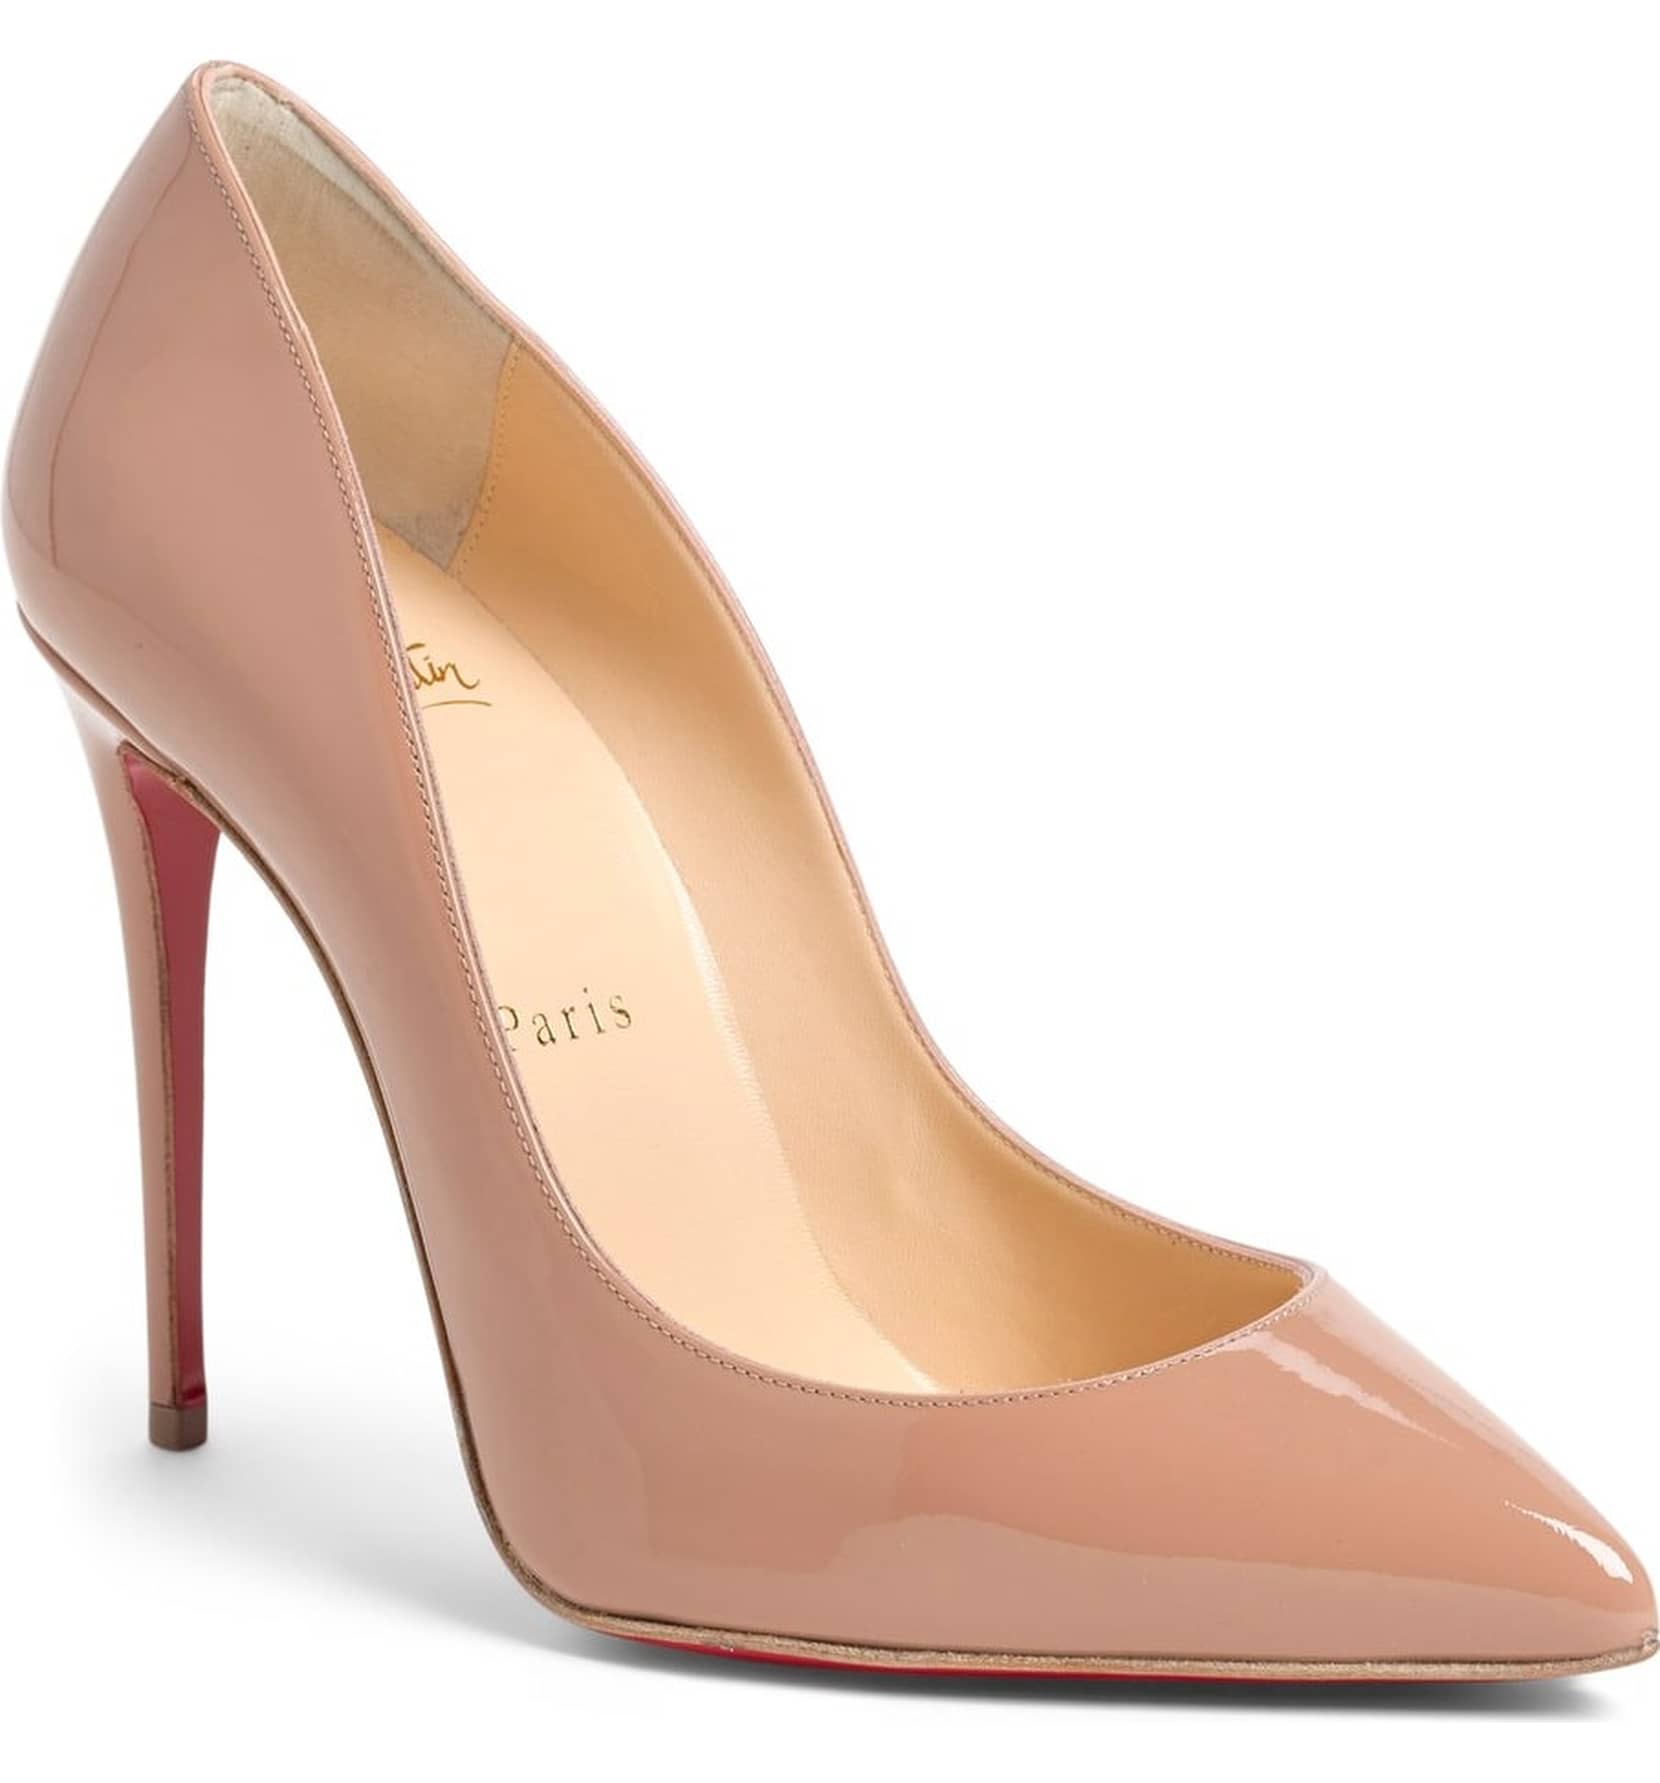 Christian Louboutin Nordstrom Rack Pigalle Flash Sales, TO 59% OFF | www.reinventhadas.com